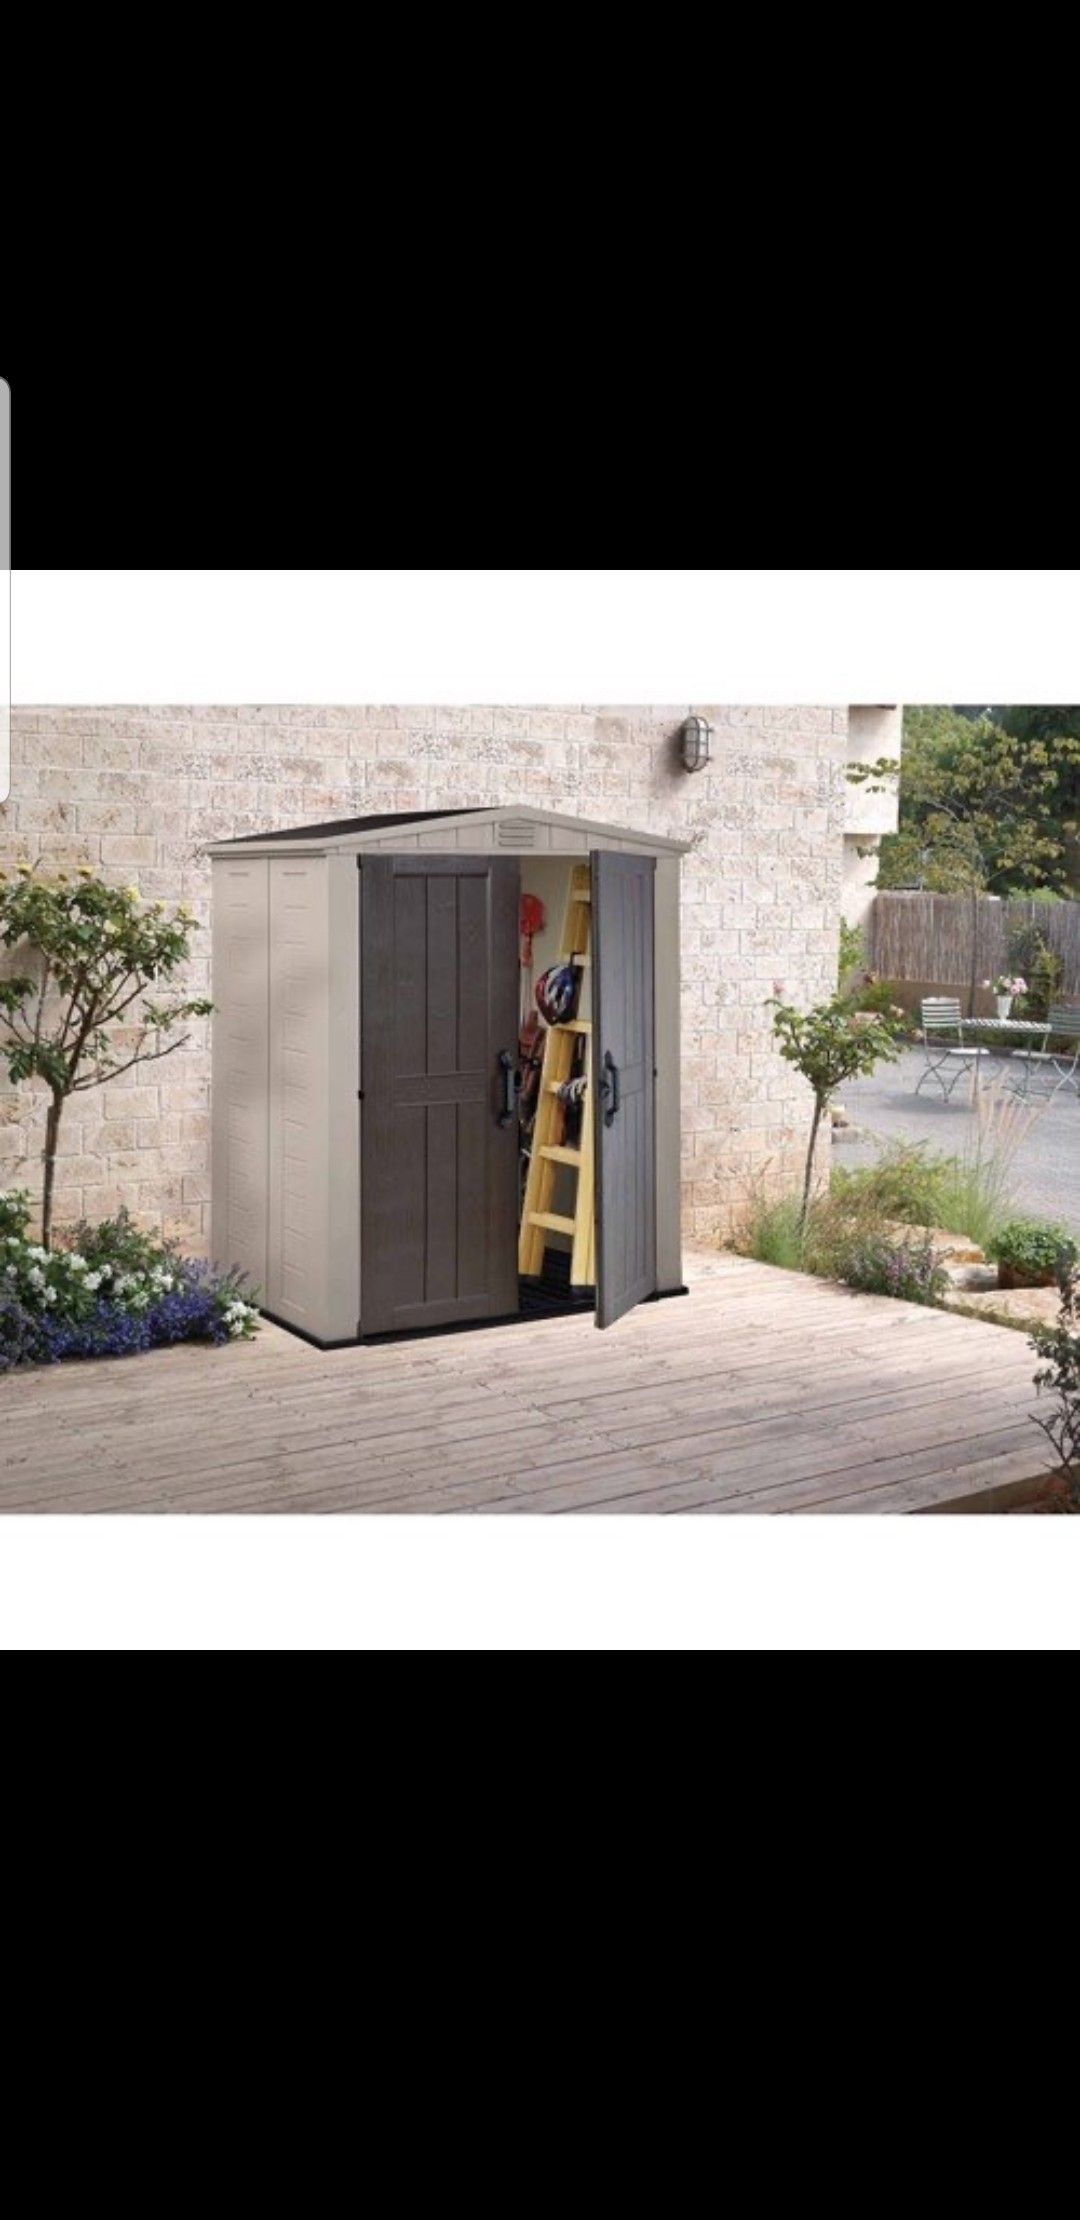 Keter Factor 6' x 3' Resin Storage Shed, Beige/Taupe